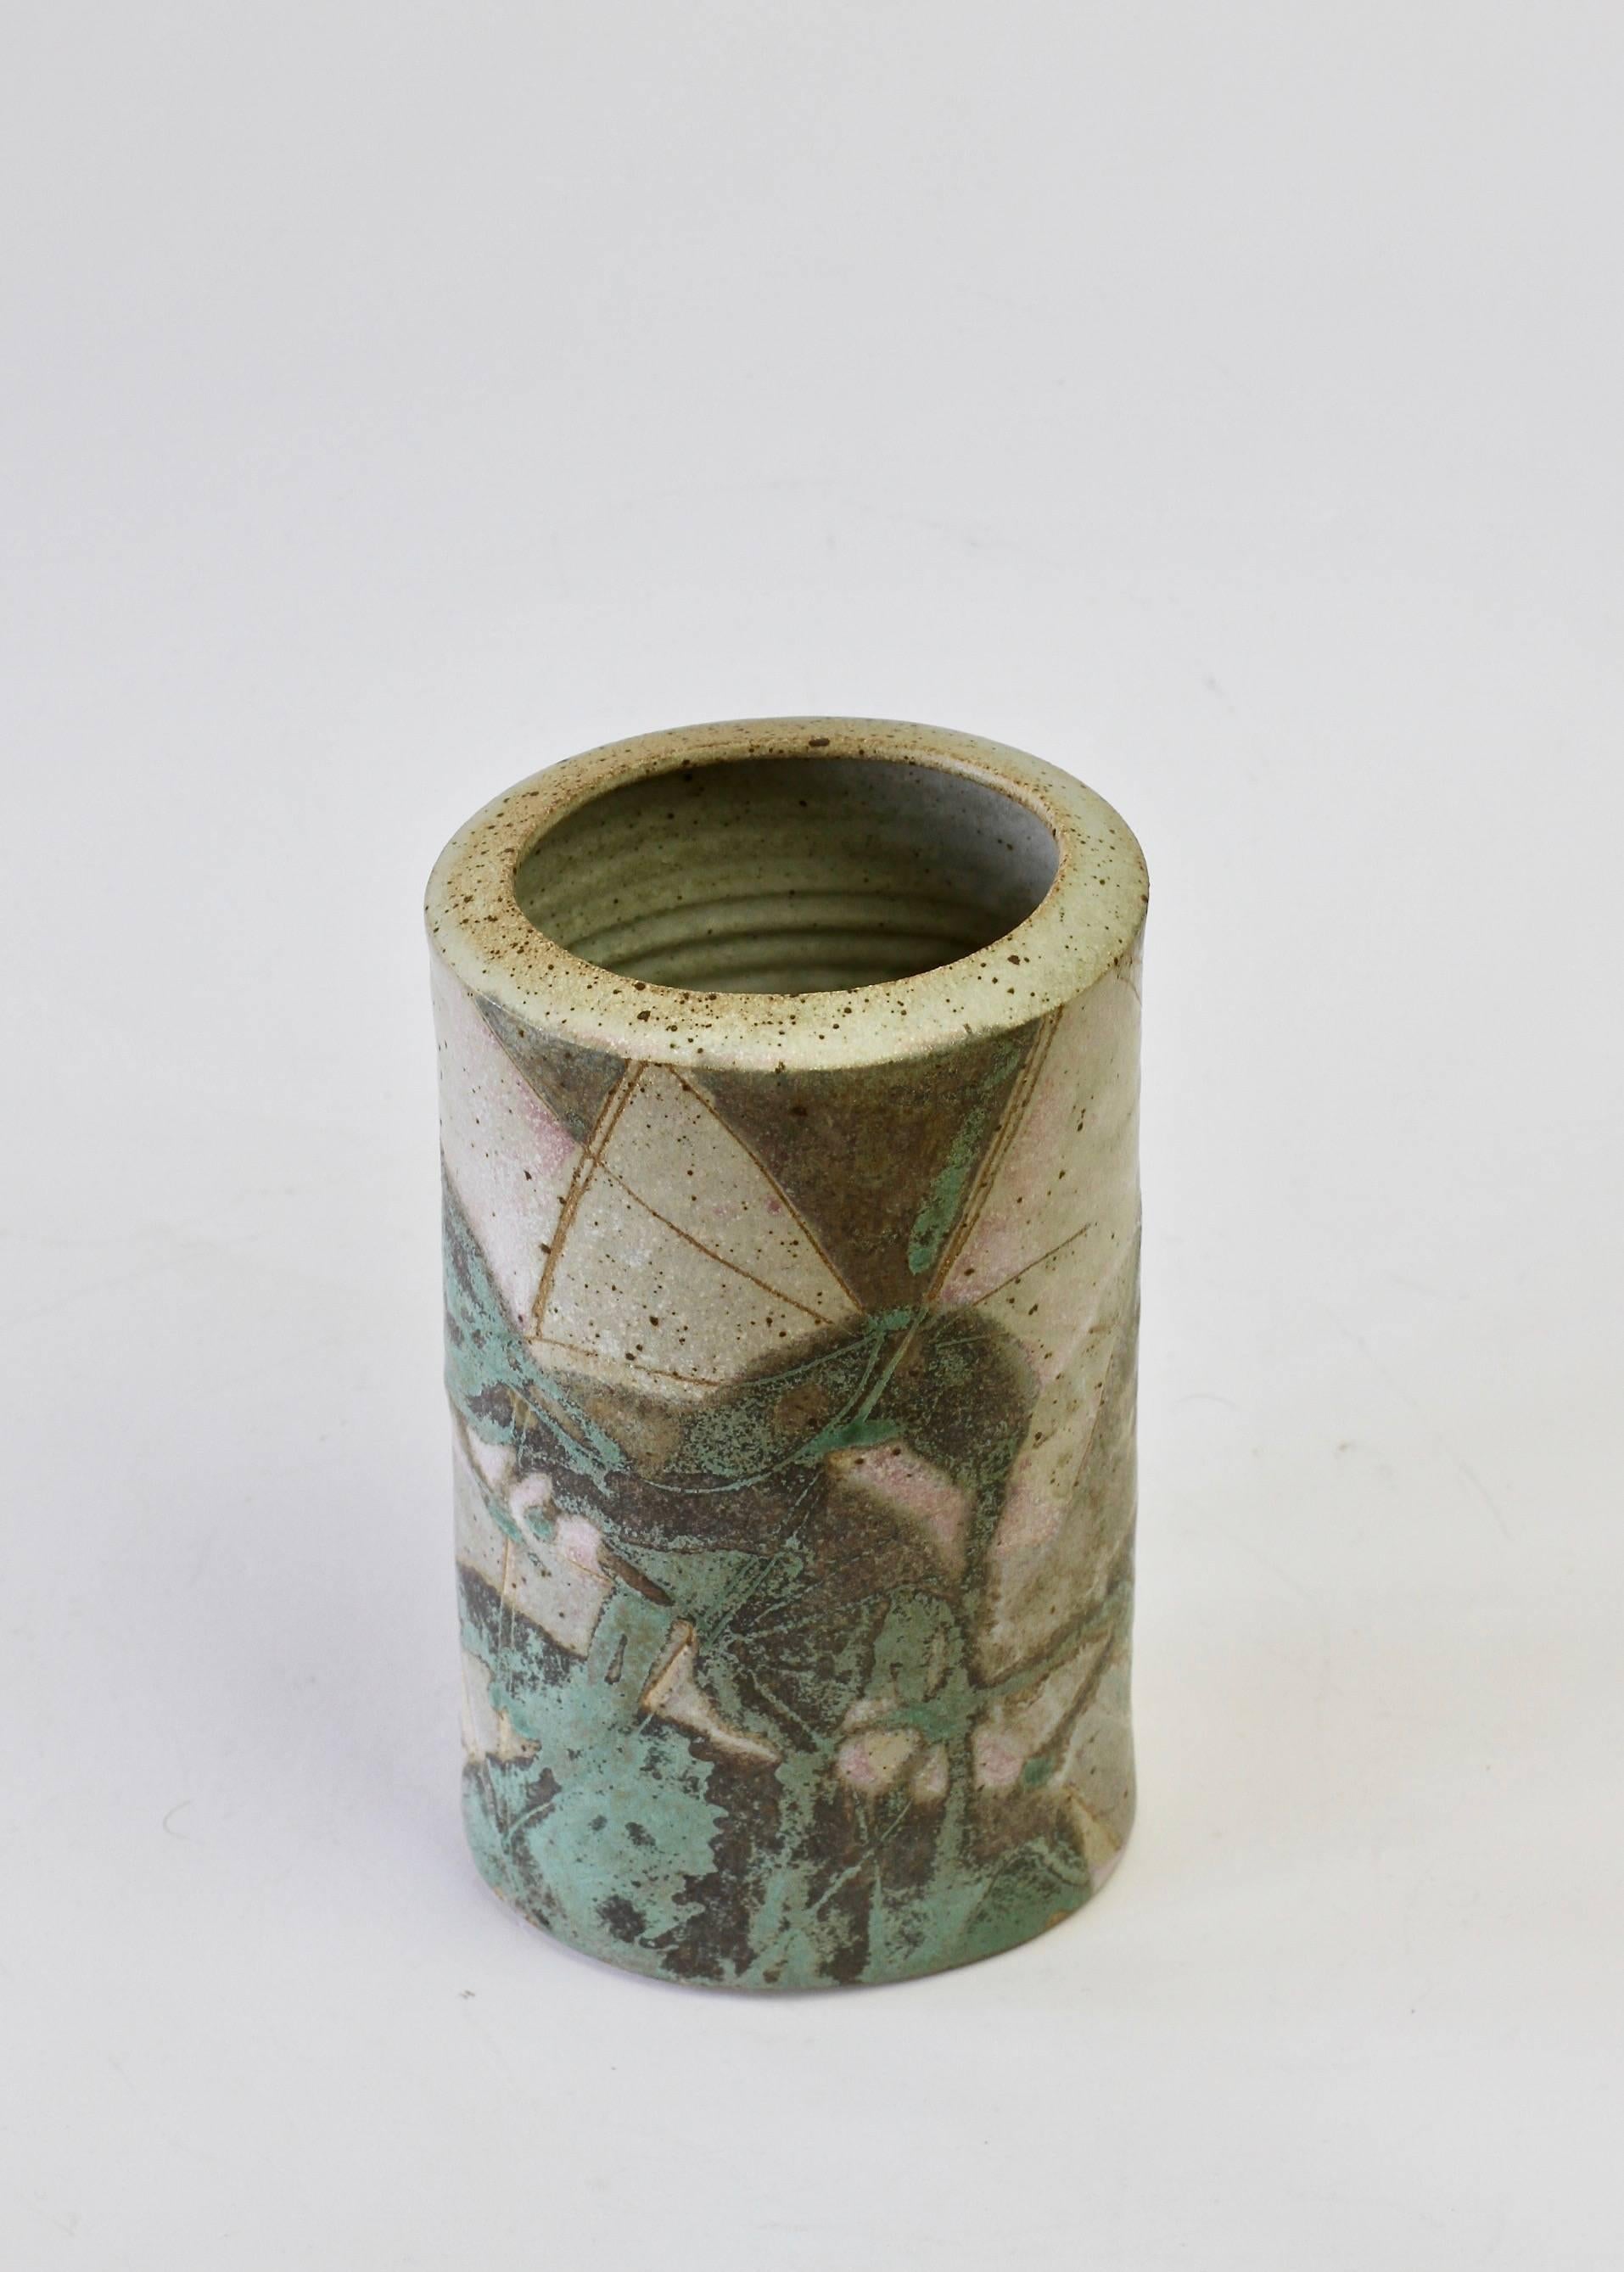 British art Studio Pottery by artist Tony Hodge (Anthony Bernulf Hodge), circa 1986. This piece represents the middle of Anthony Hodge's career as a ceramic artist as, in 1993, he was unable to continue working in ceramics and, instead, focussed